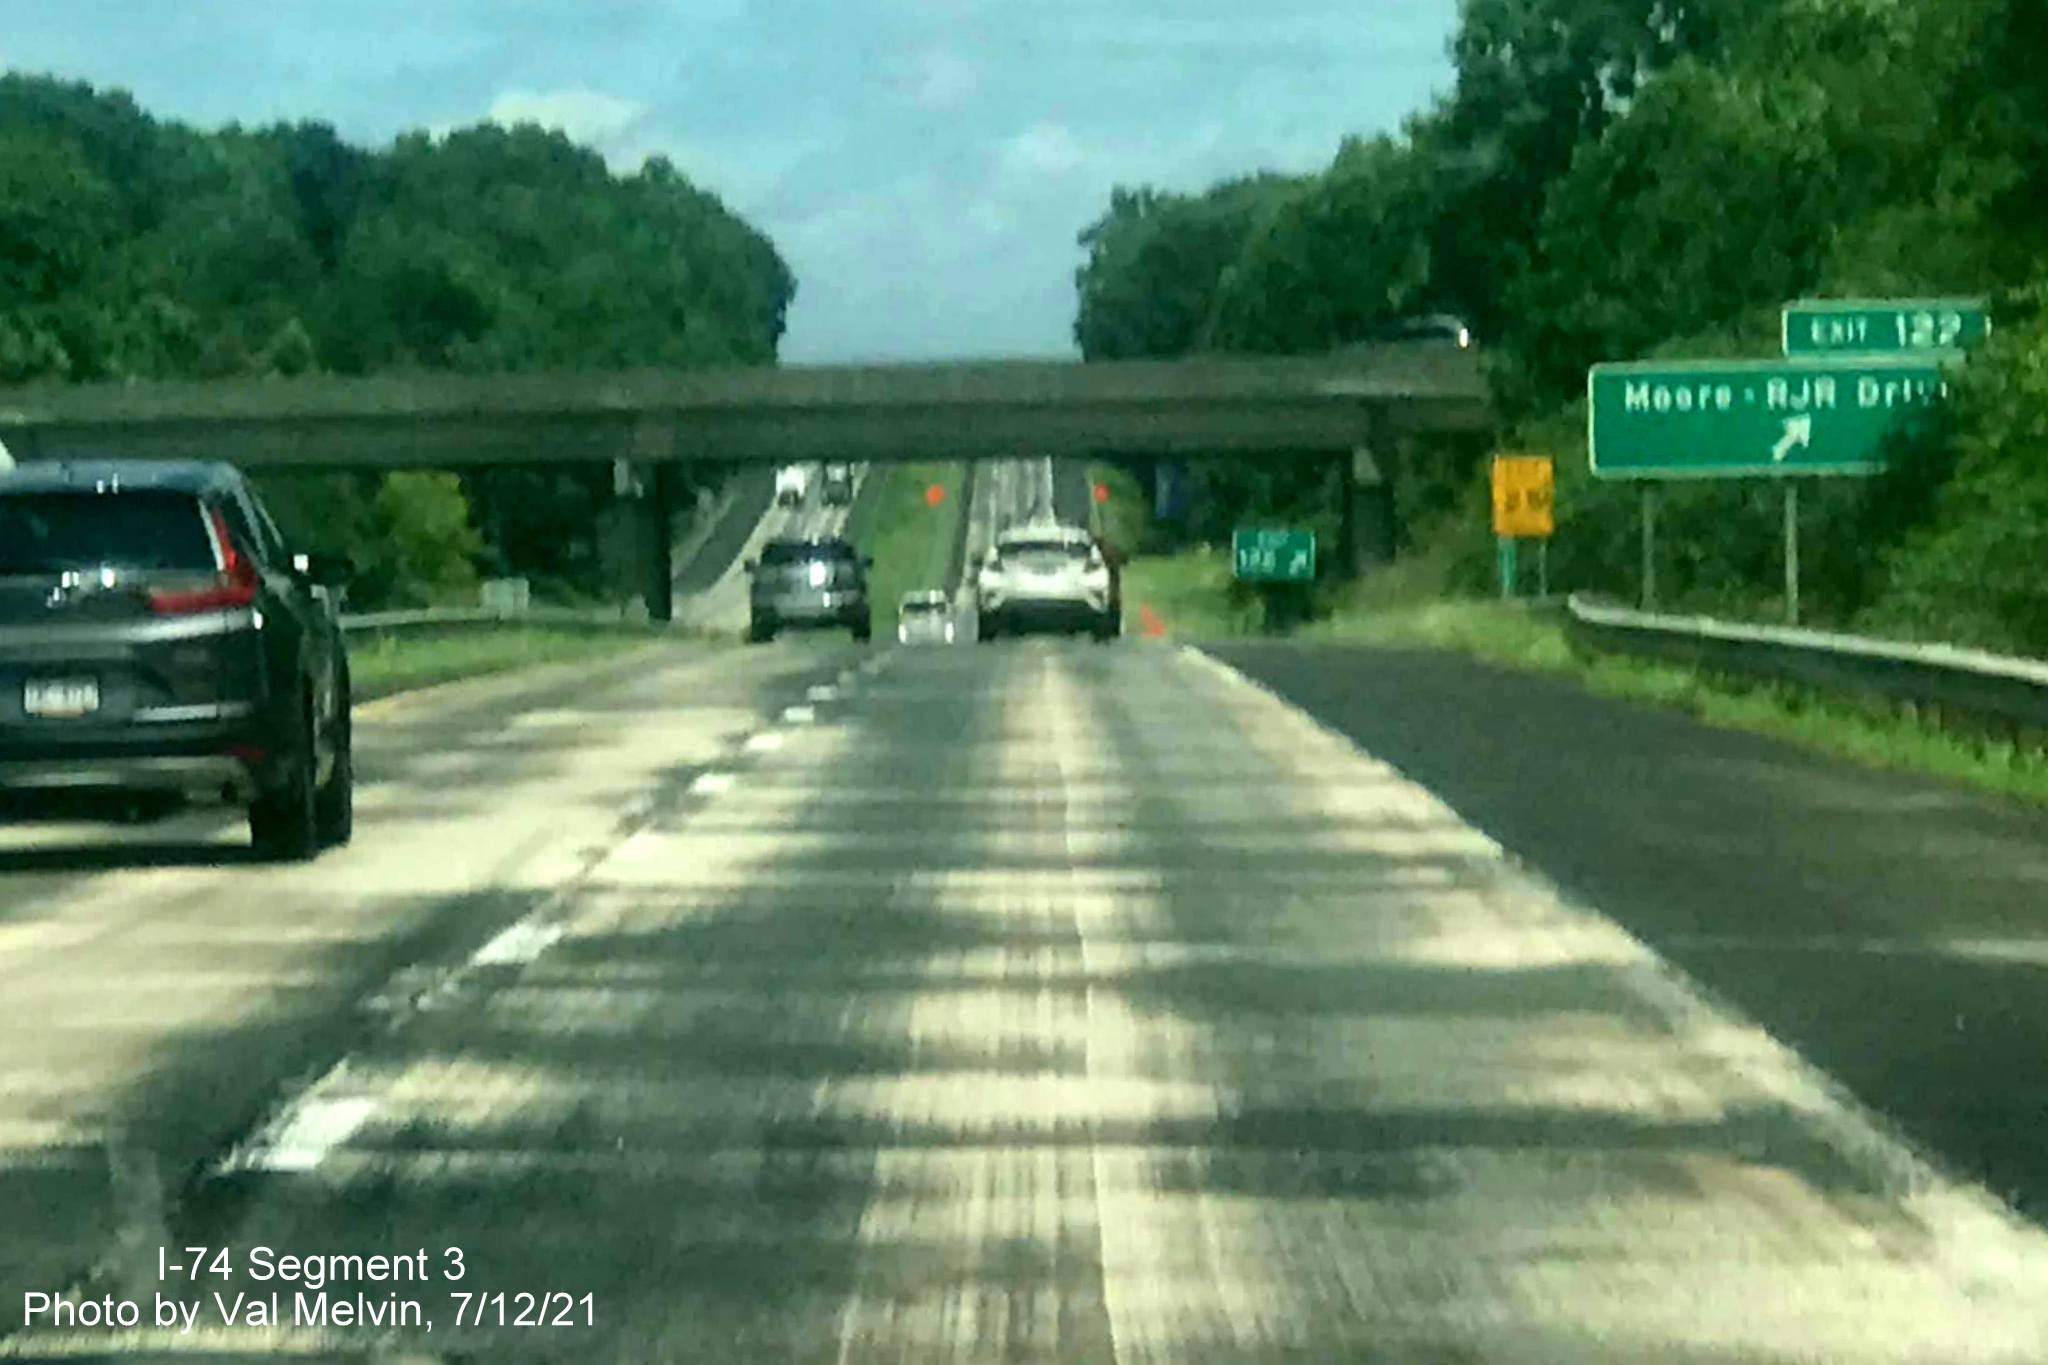 Image of newly widened shoulders on US 52 North (Future I-74 West) in Forsyth County approaching the
        Moore-RJR Drive exit, by Val Melvin, July 2021